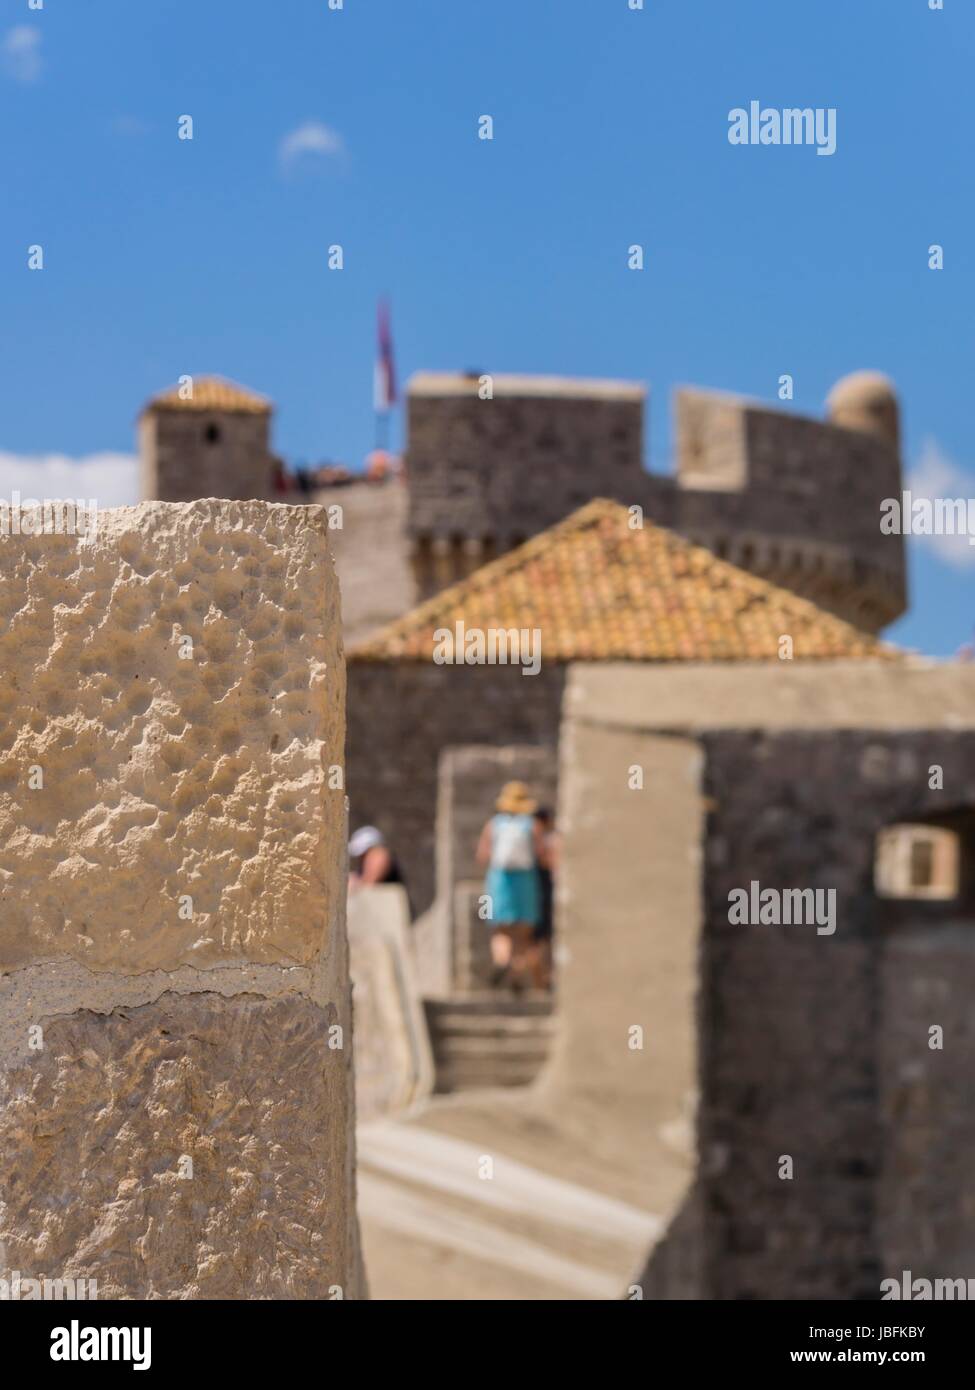 Dubrovnik wall visitors tourists blurred out of focus in background image focused on wall Stock Photo